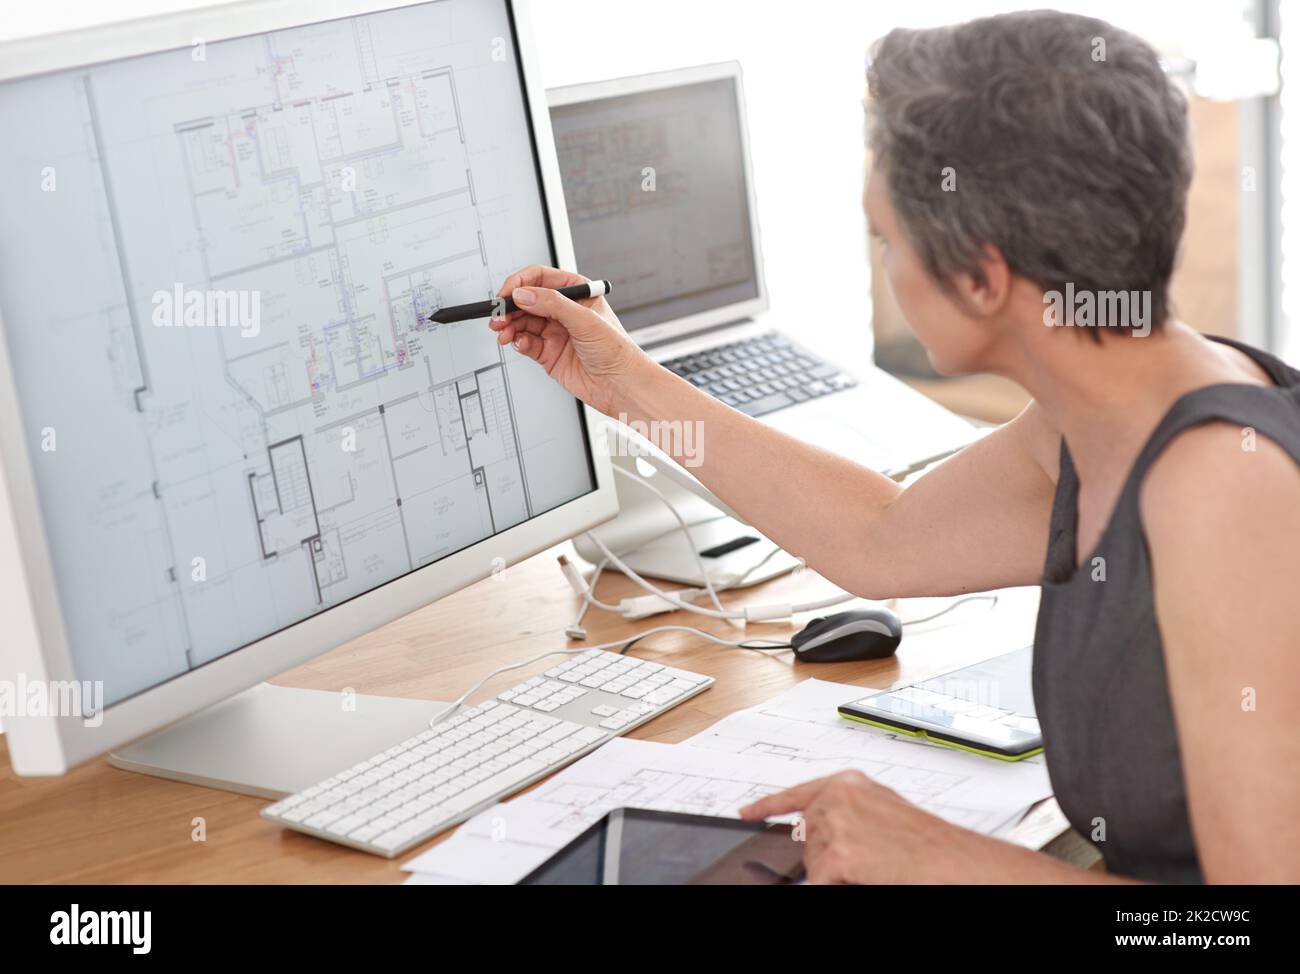 Forward-thinking architecture. A mature female architect working on building plans on her touchscreen computer. Stock Photo